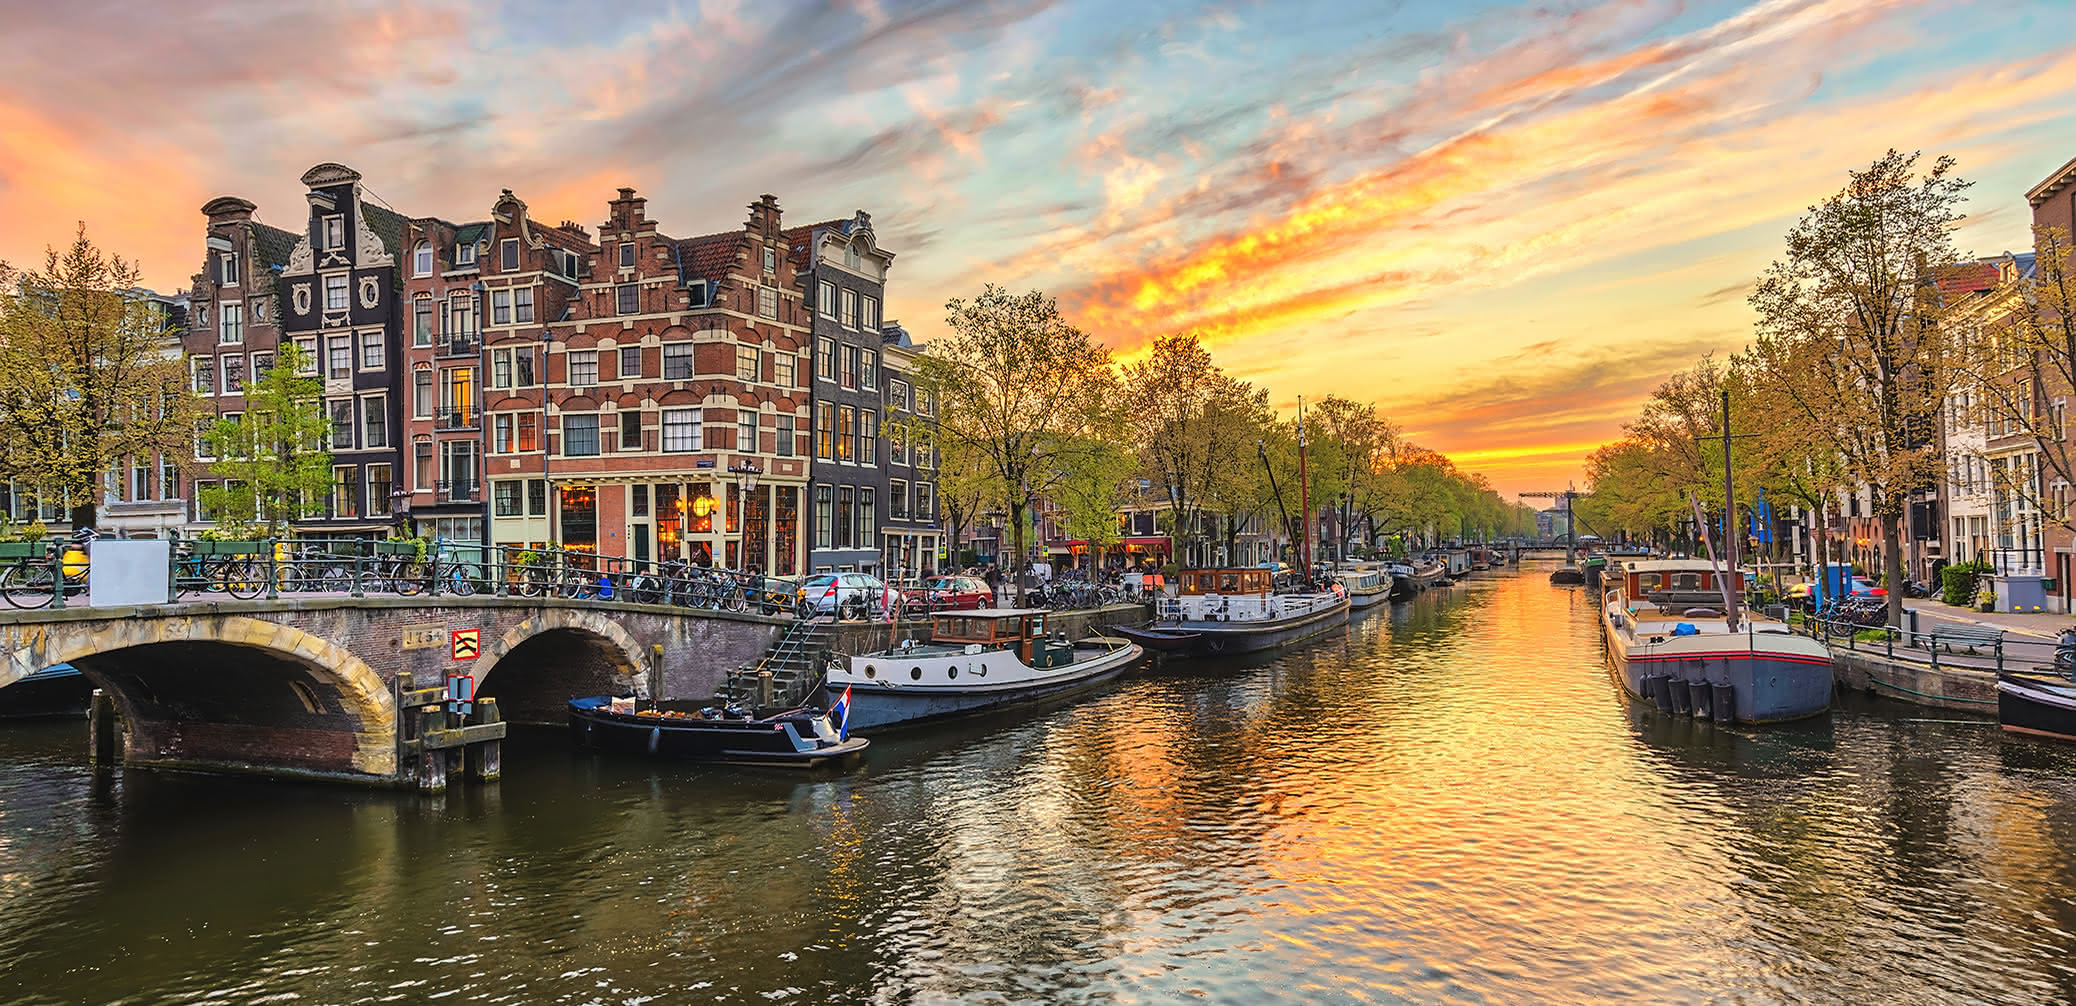 Is There A Ritz-Carlton In Amsterdam?